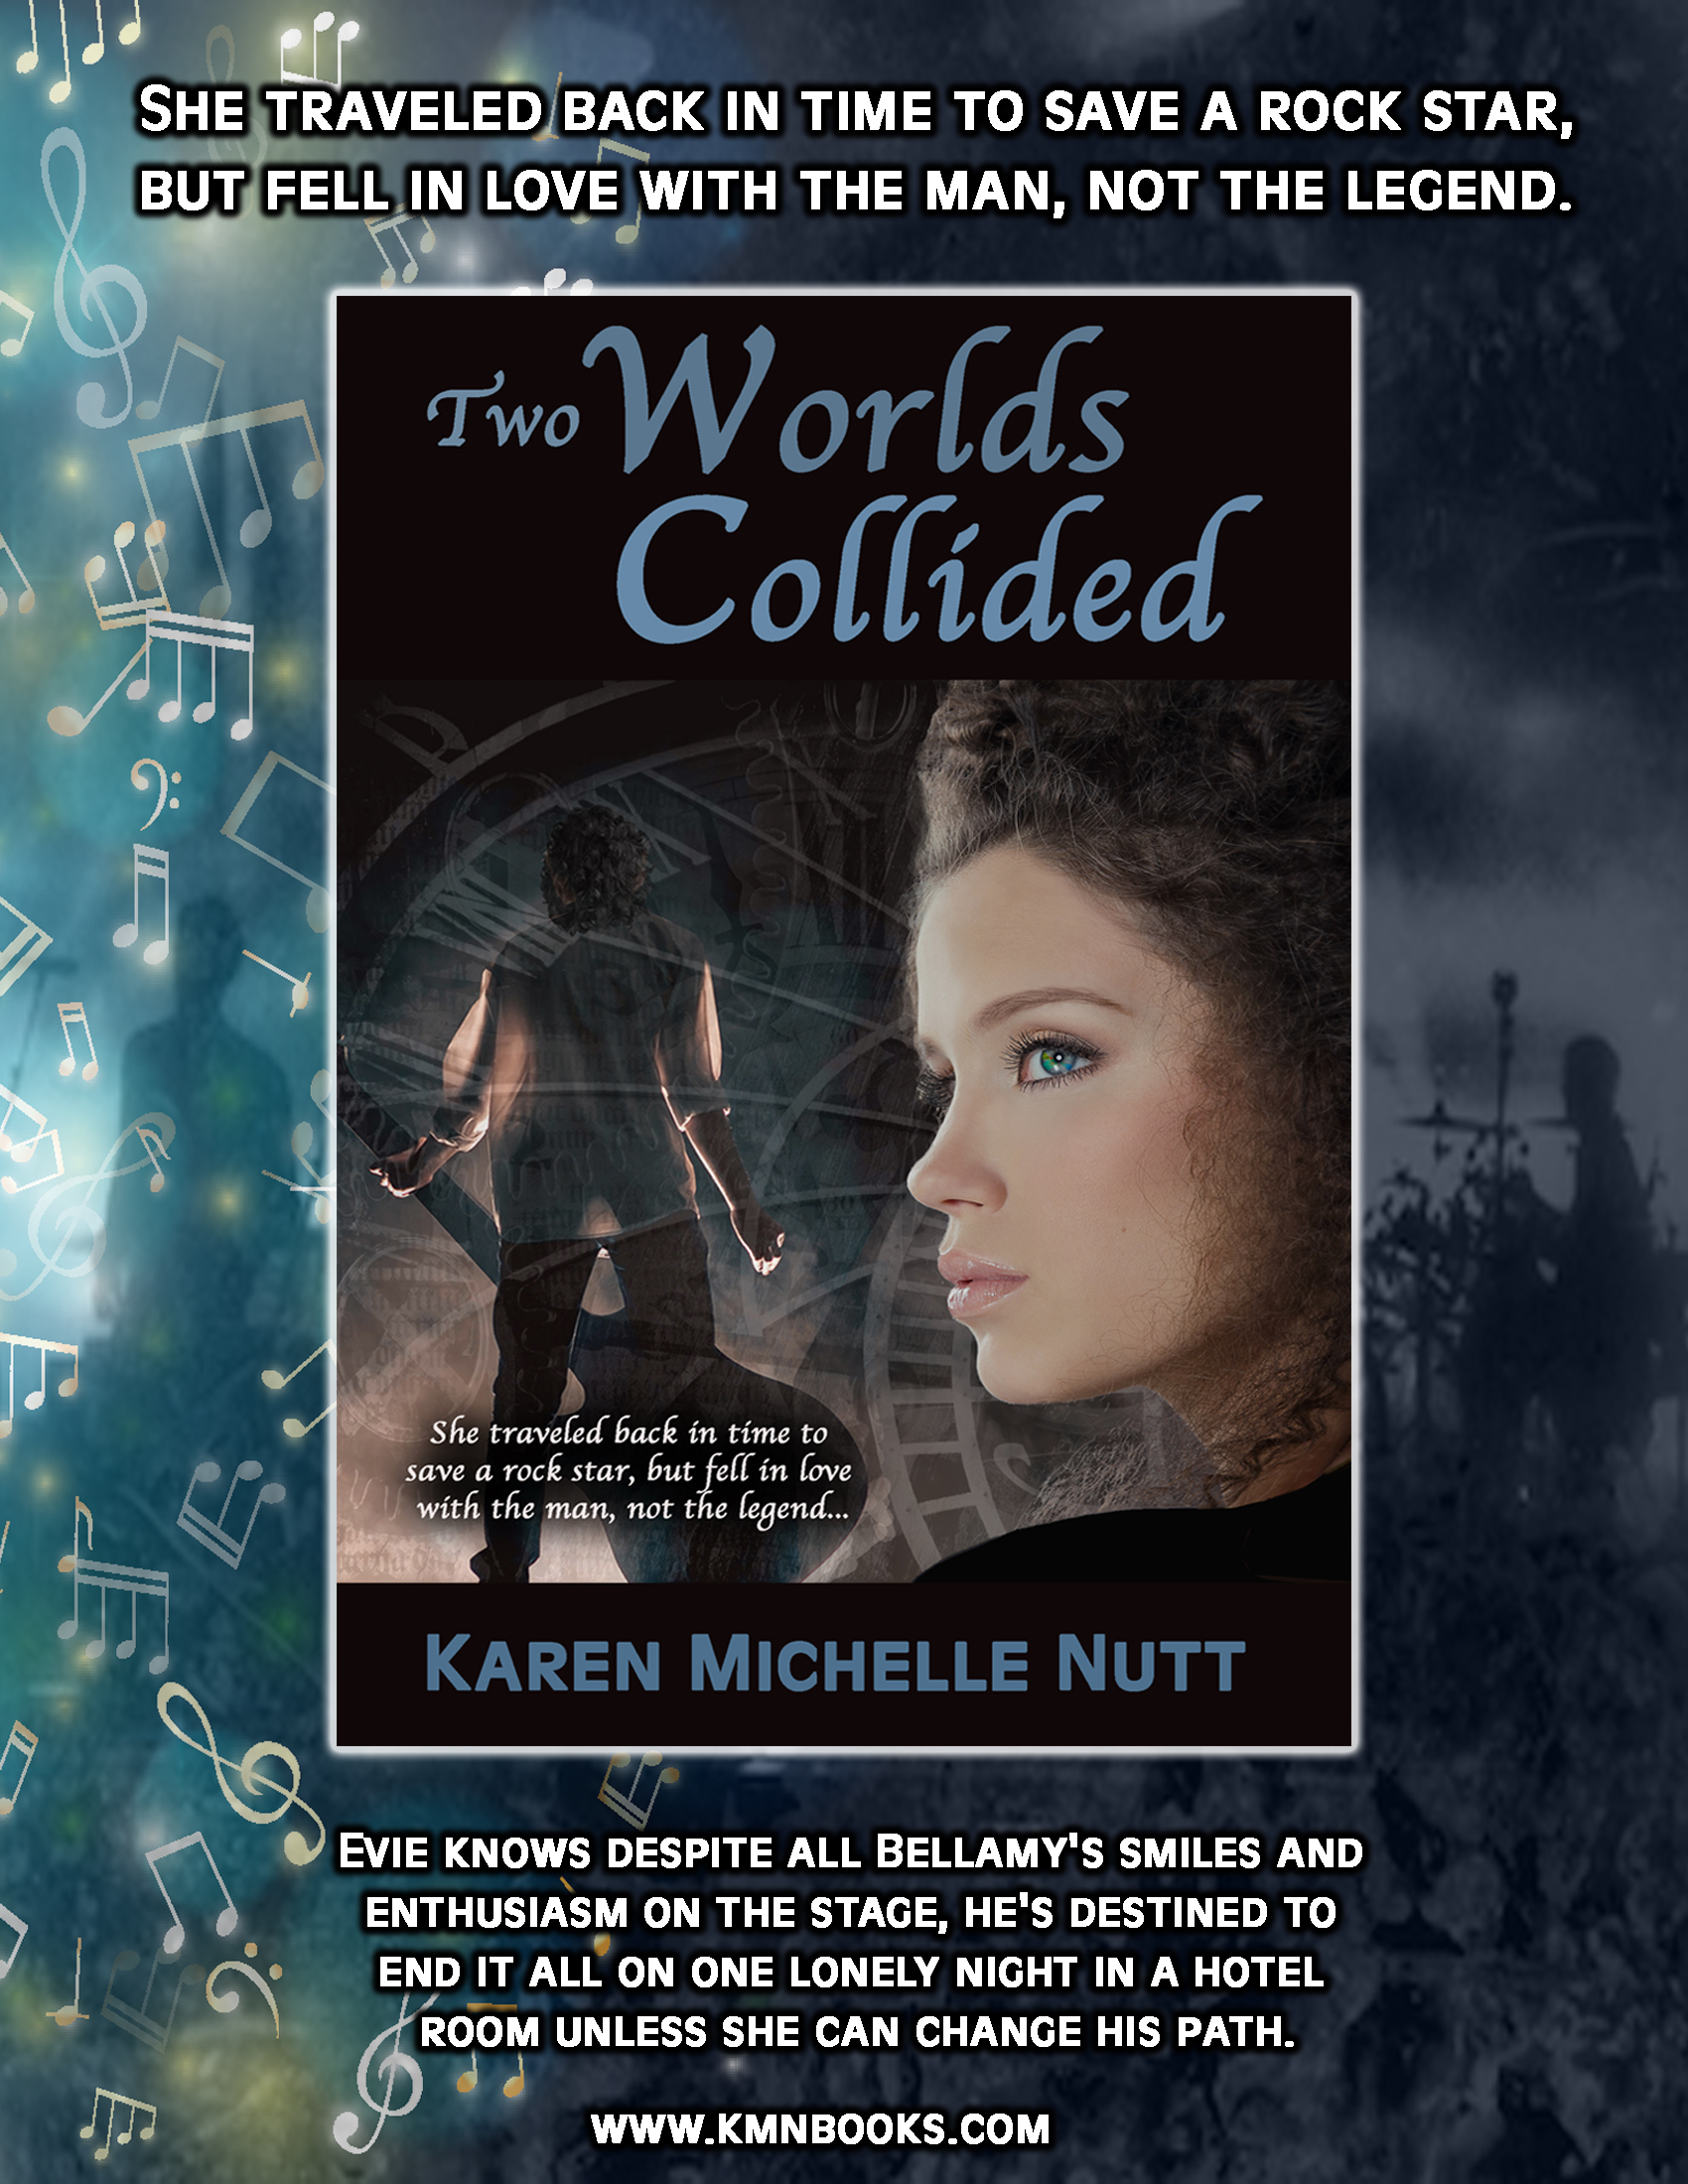 Two Worlds Collided by Karen Michelle Nutt